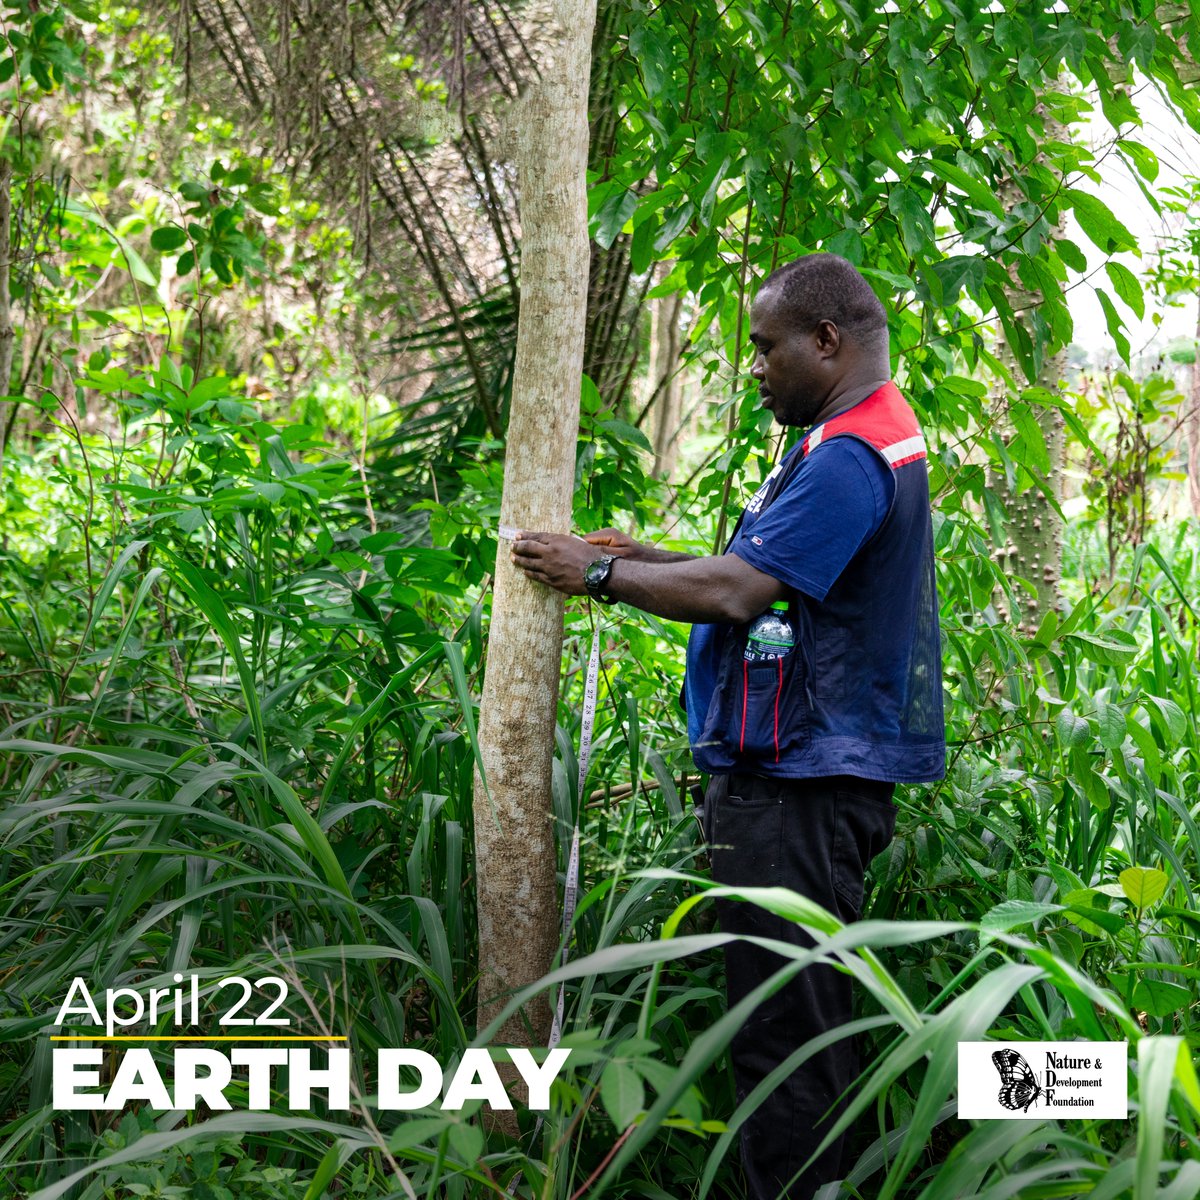 Happy Earth Day!  As part of Sankofa Project, Our organization is committed to tracking carbon capture potential. Every tree counts in the fight against climate change!  
#SankofaProject #EarthDay #CarbonCapture